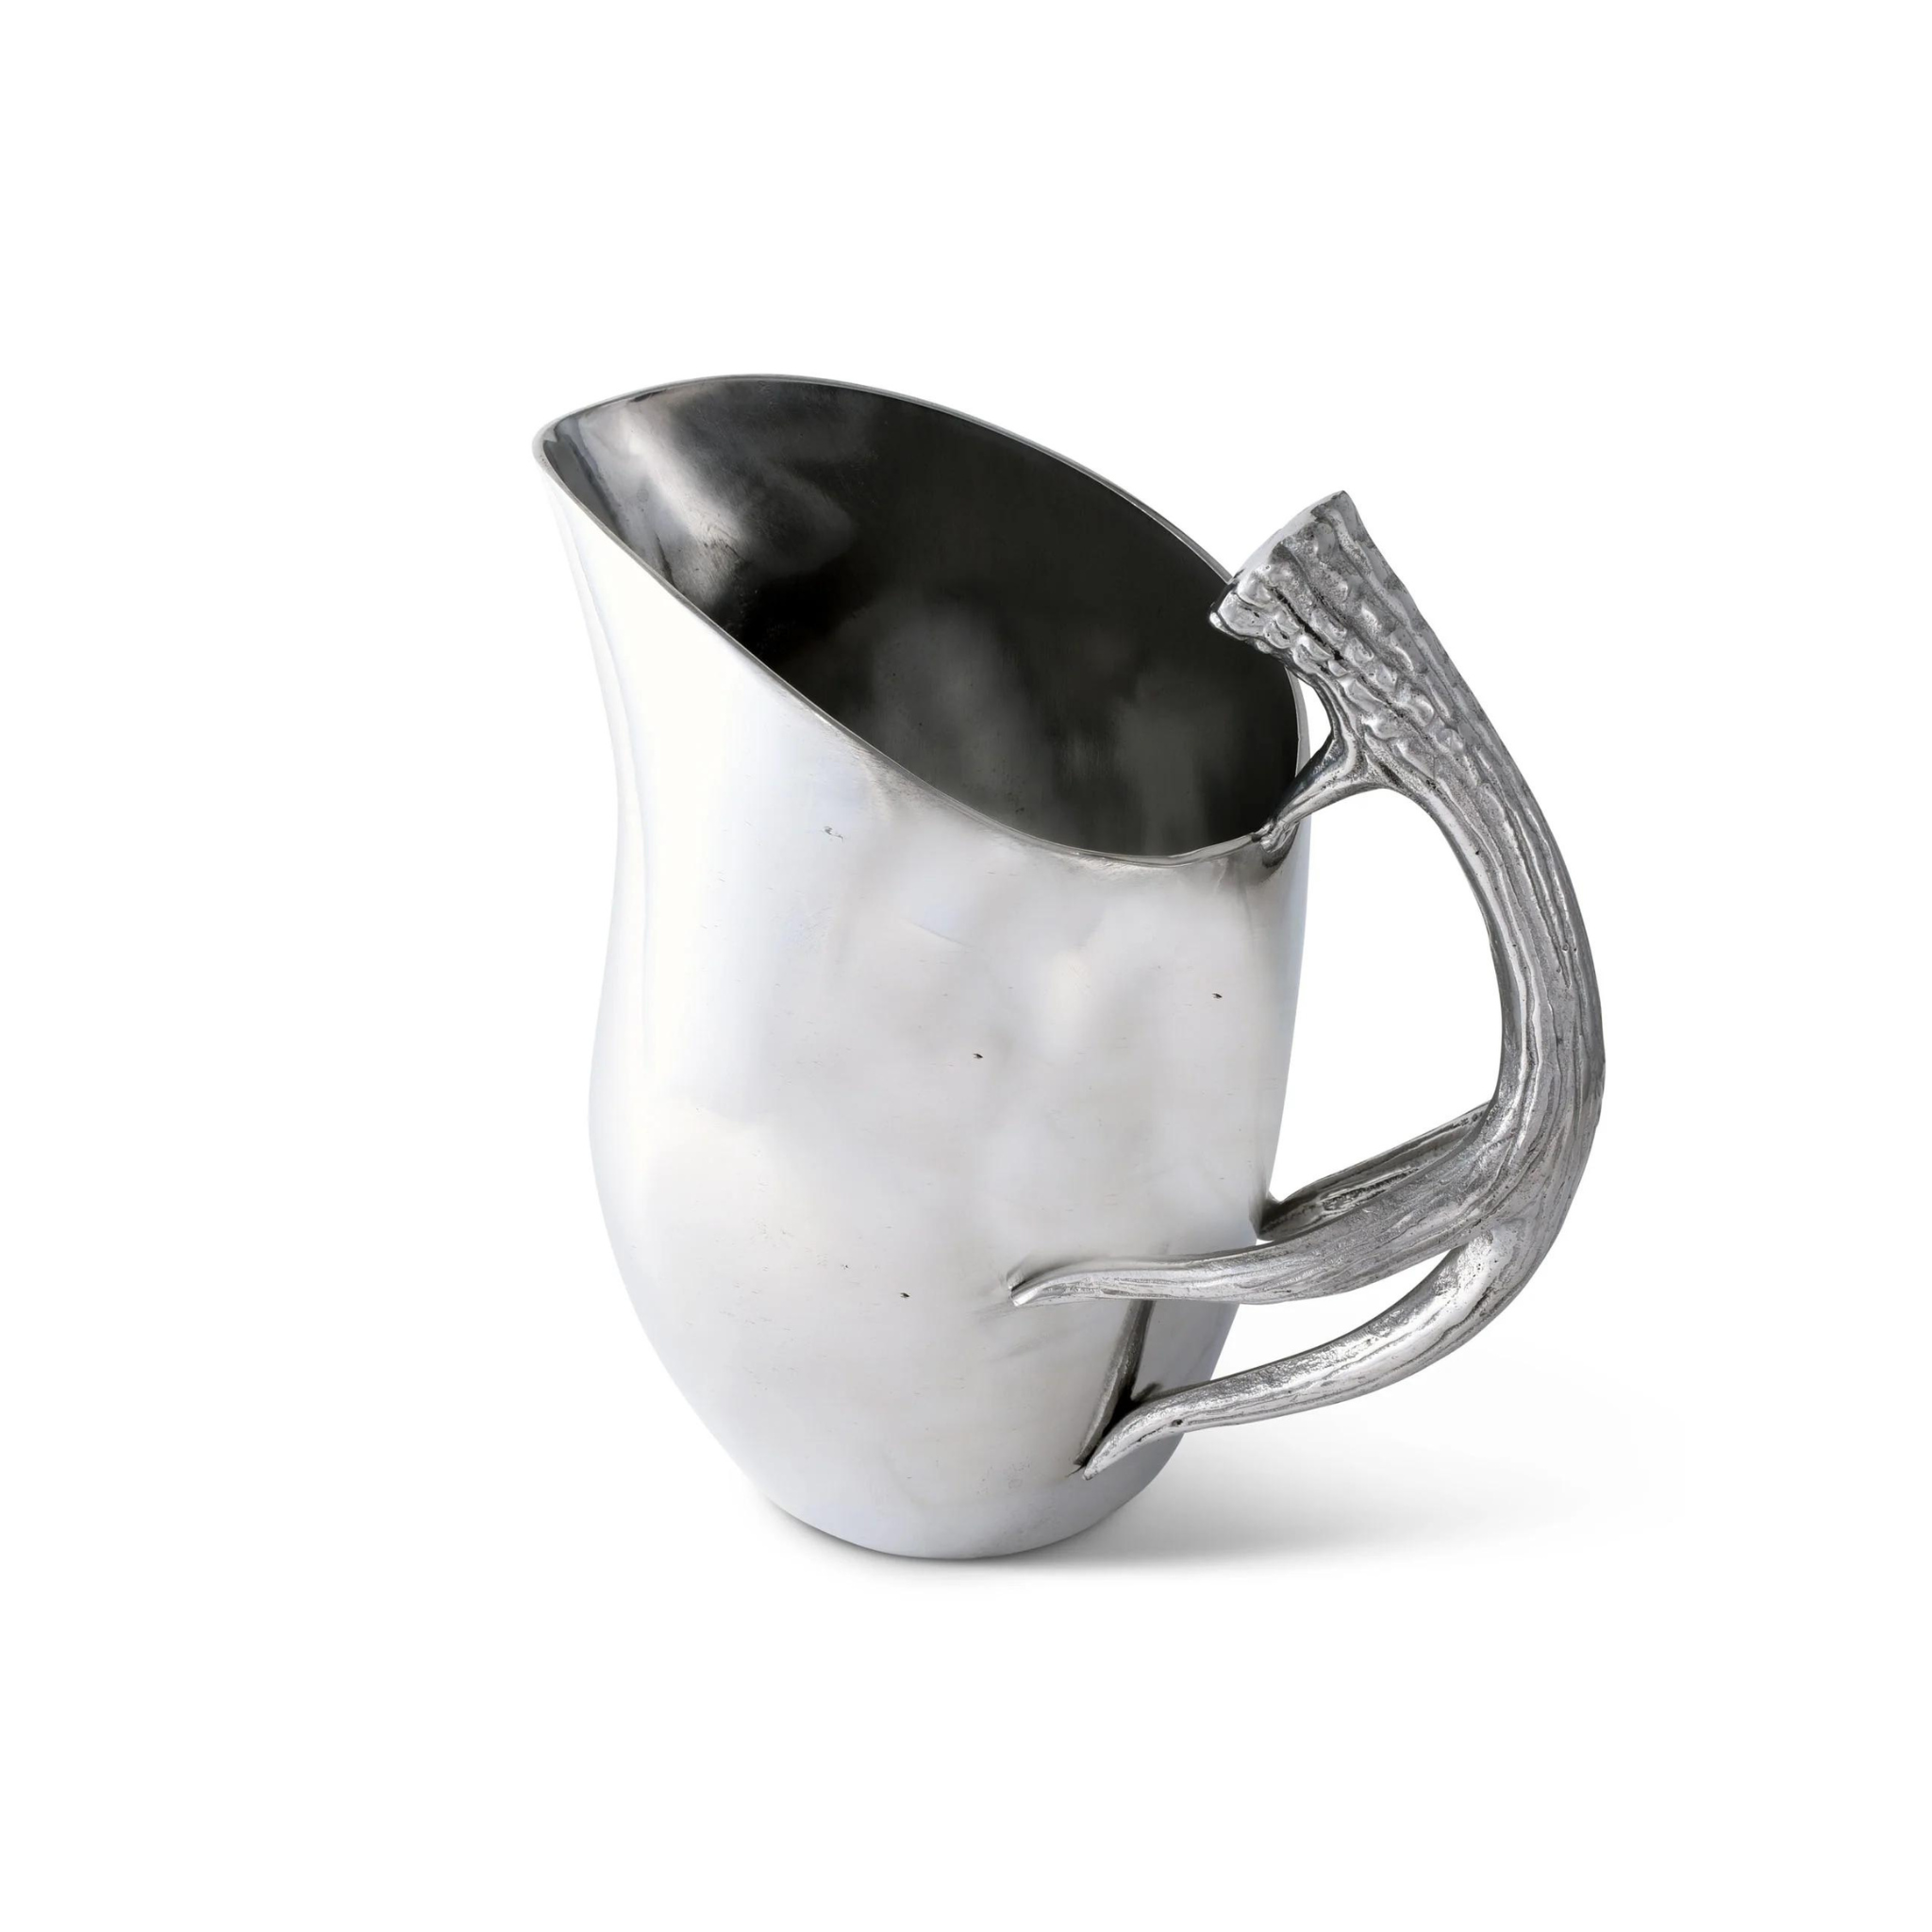 a silver pitcher with an elegantly curved handle resembling a stylized antler. The body of the pitcher is smooth with a reflective surface, and it tapers towards the top, ending in a pointed spout for pouring. The design is modern with organic elements, suggesting a contemporary take on traditional serveware.